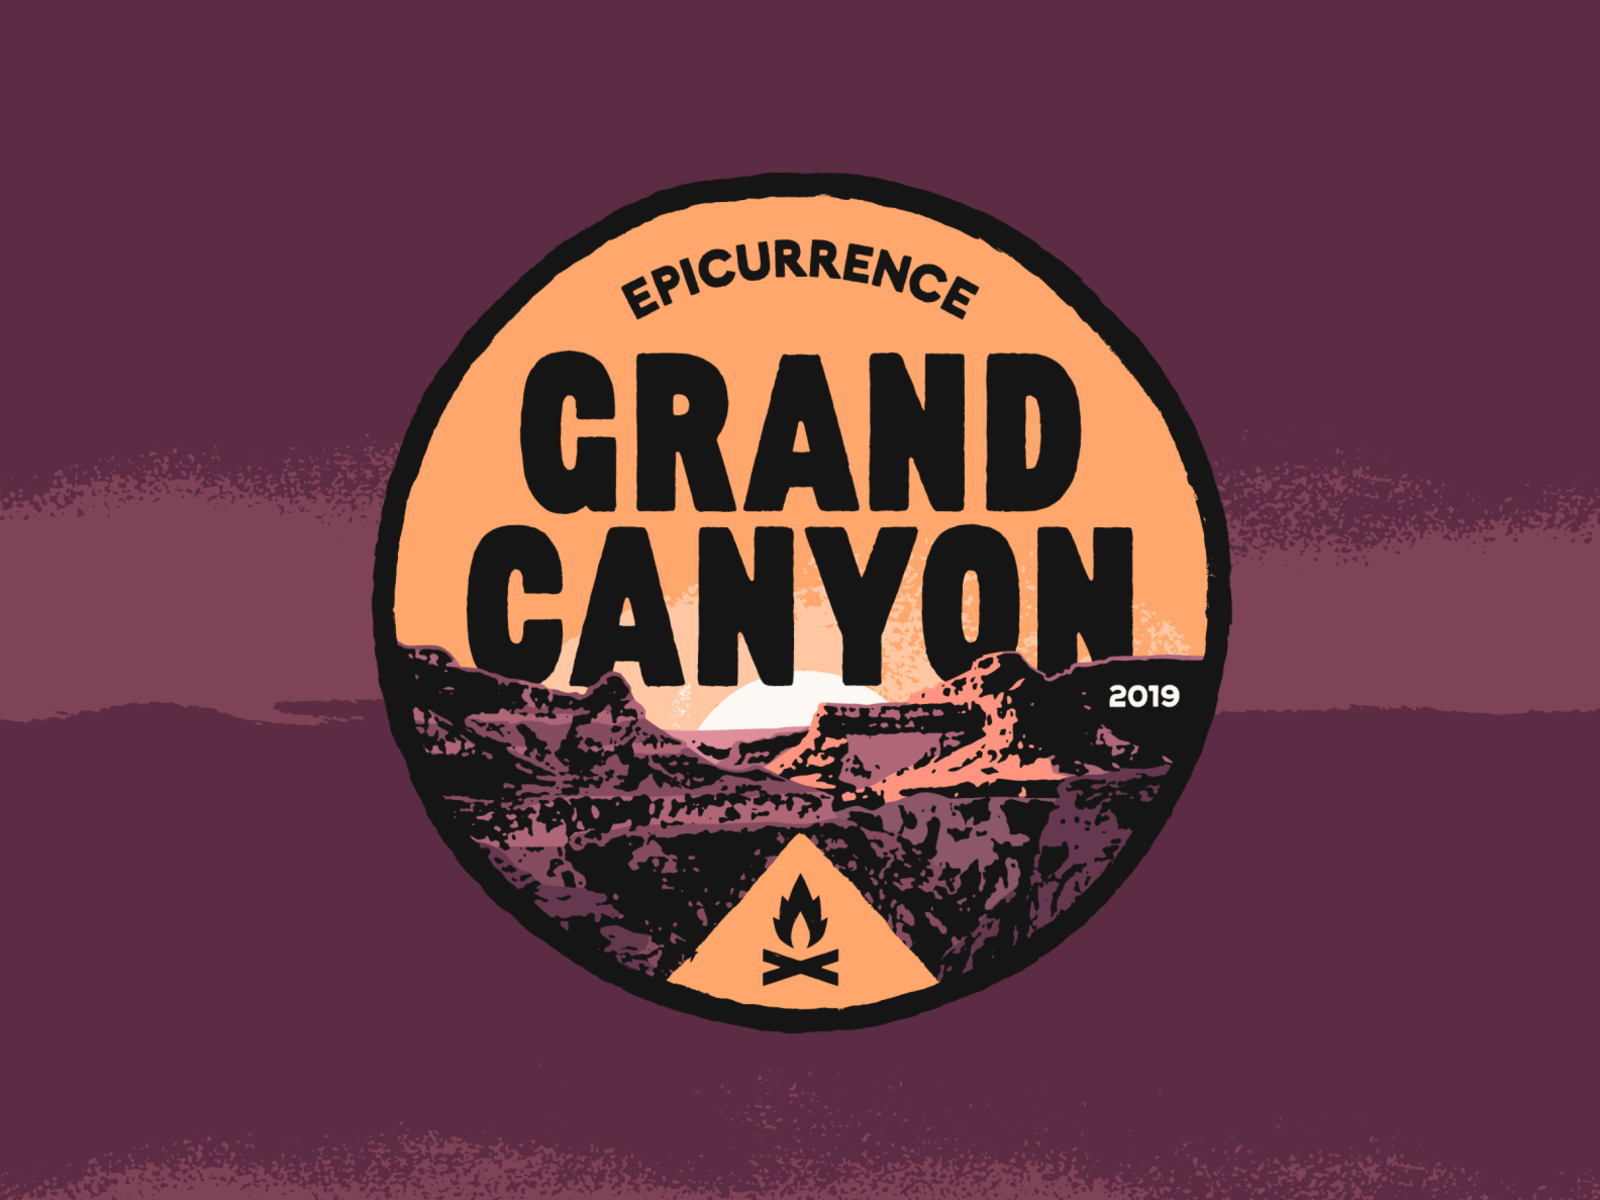 Epicurrence Grand Canyon type bitmap lockup badge horizon mountains camping campfire sunset sun painted textured typography illustration outdoors grand canyon